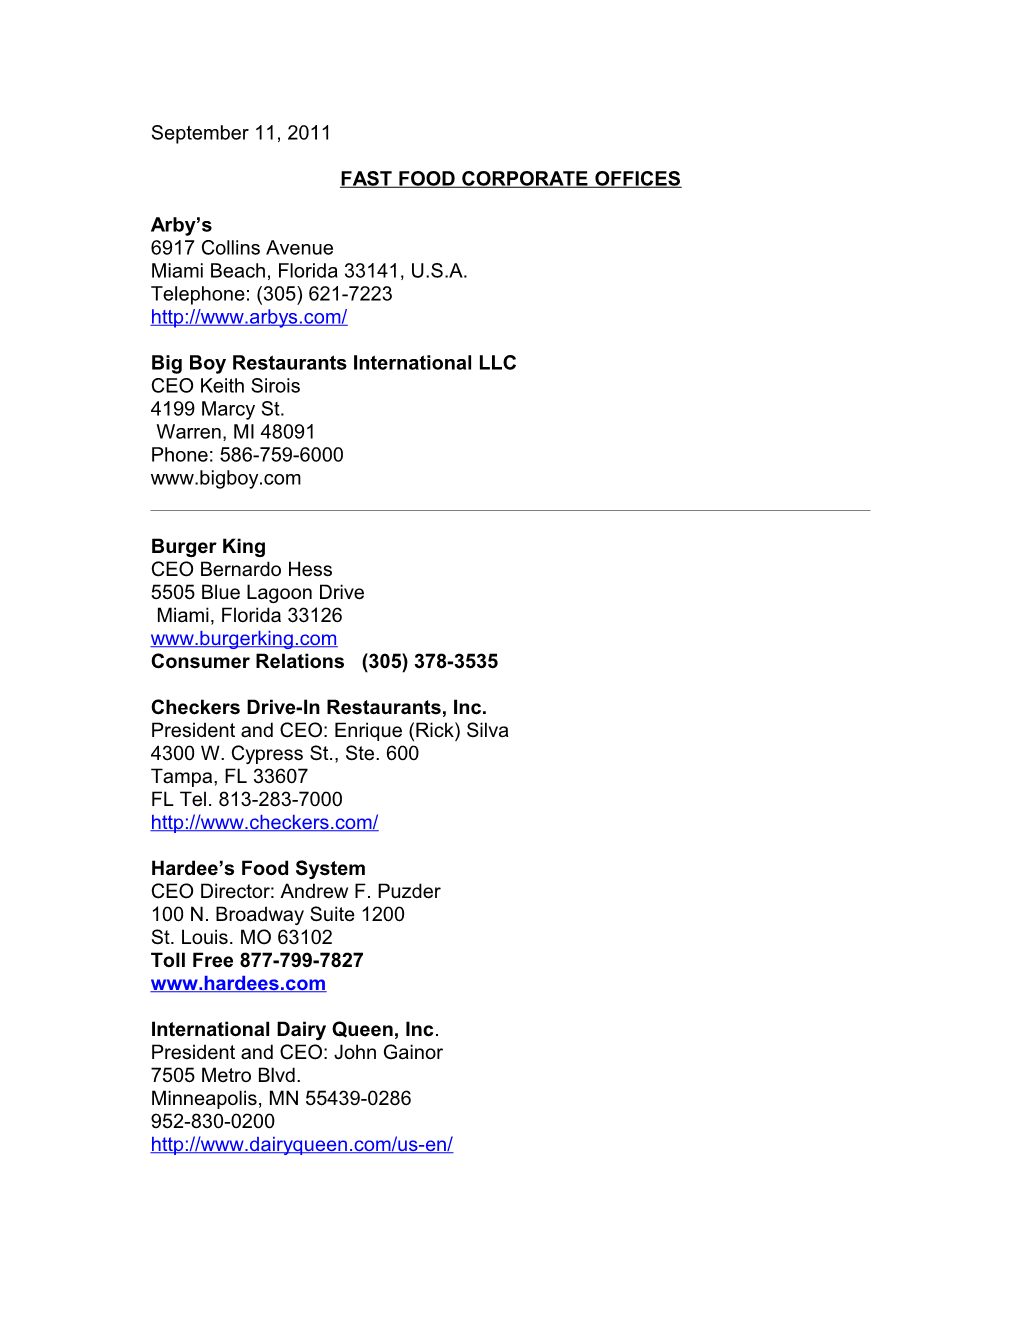 Fast Food Corporate Offices